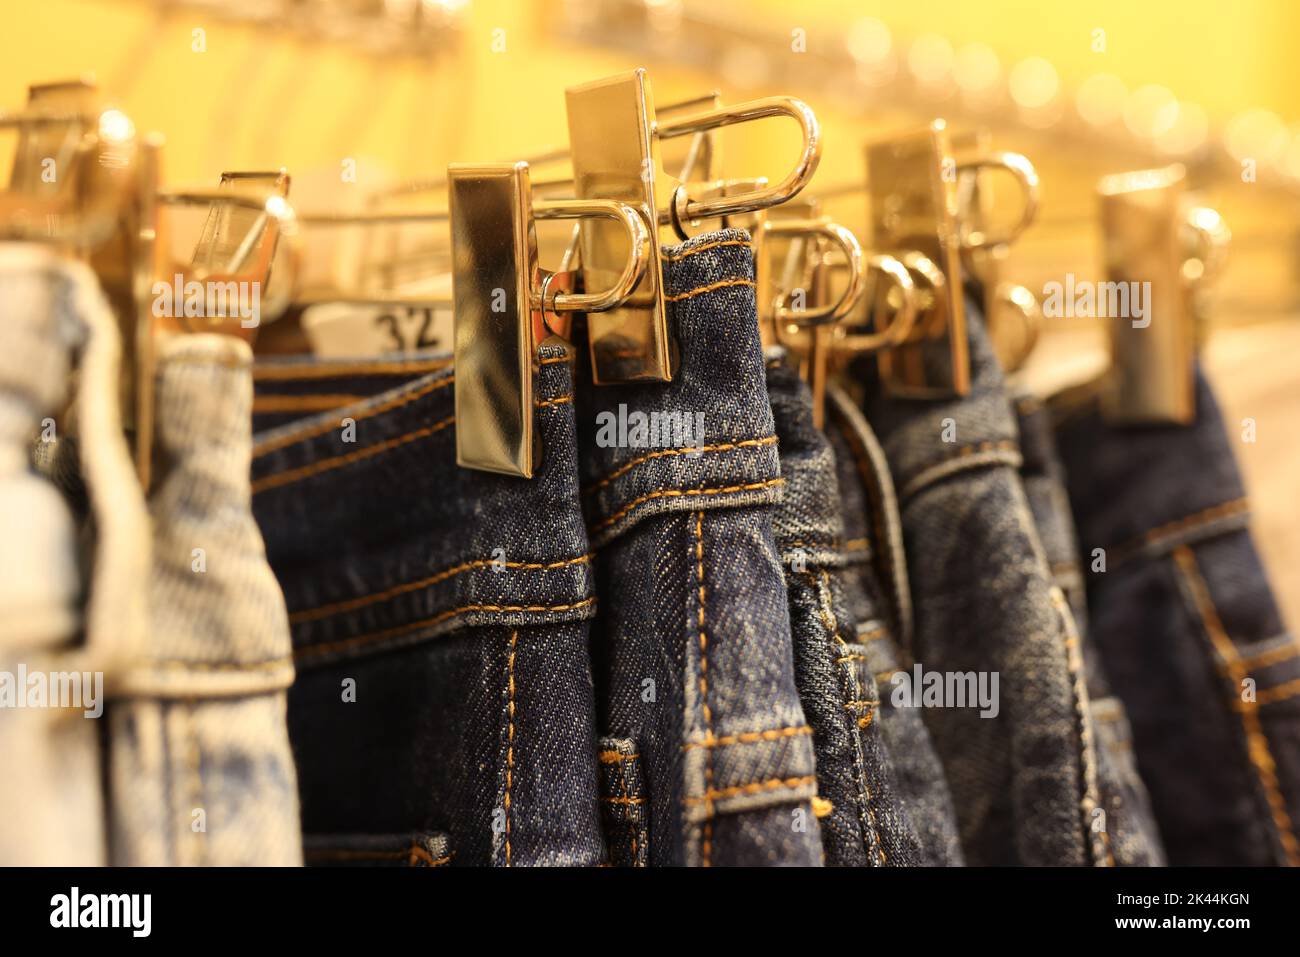 Denim shorts and pants hang on hangers in clothing store Stock Photo